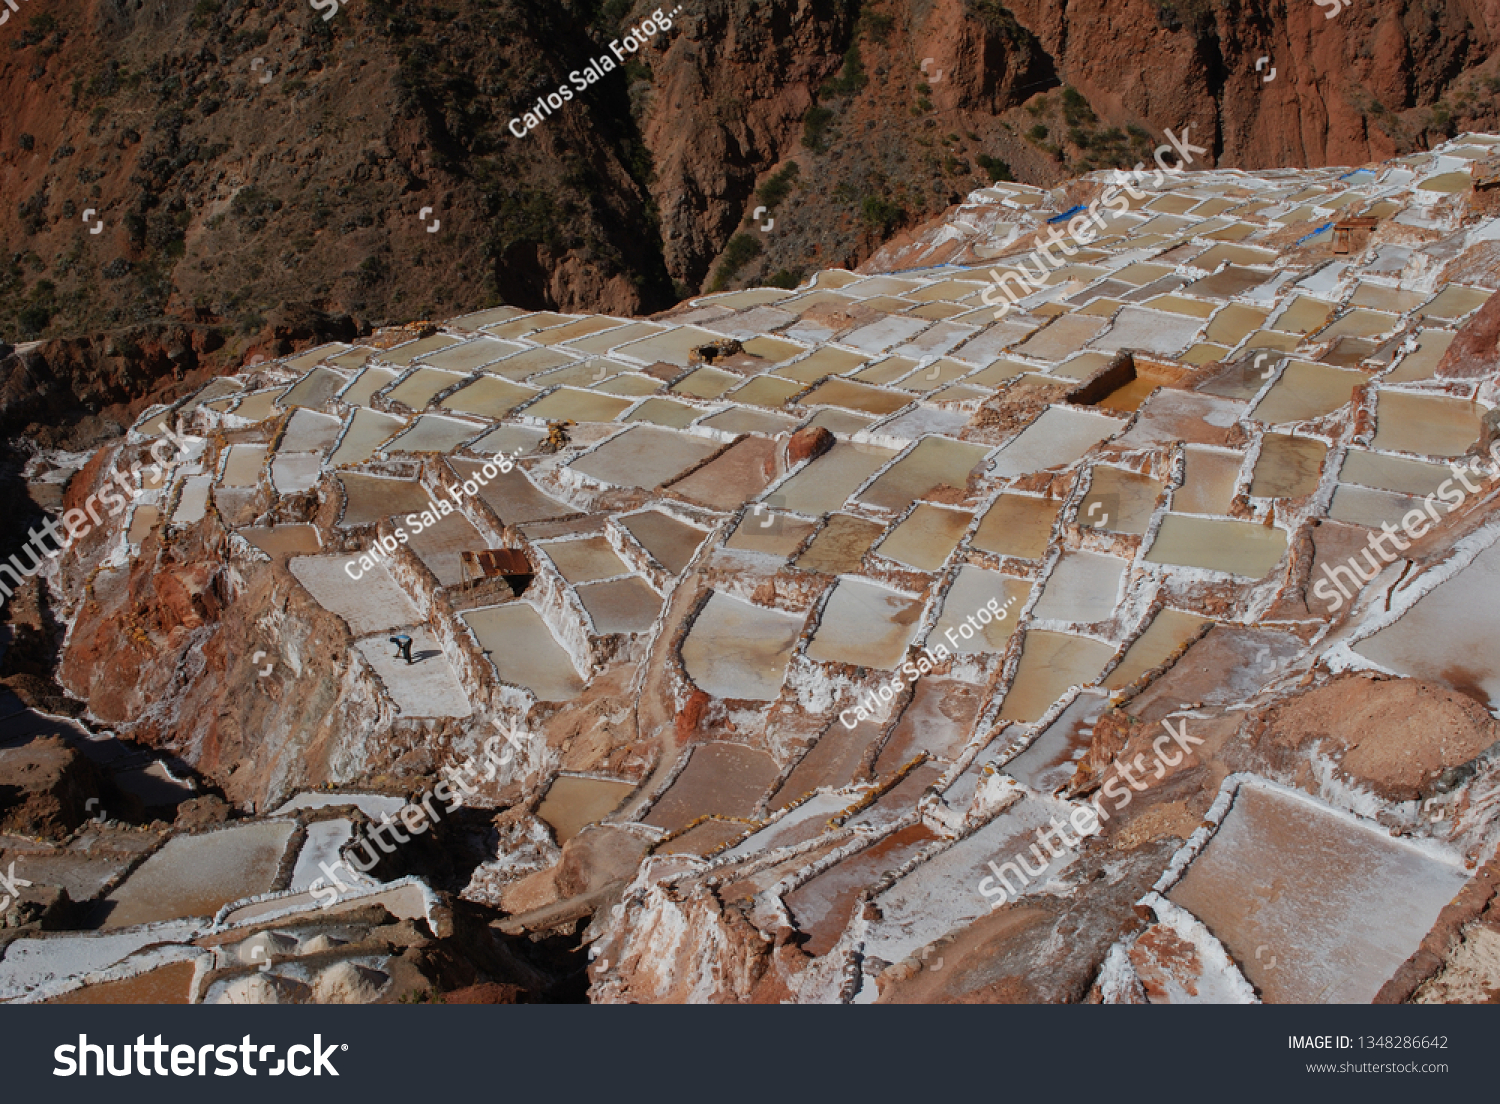 Different angles and perspectives of the evaporation ponds of the salt mines of Maras in Cusco. #1348286642